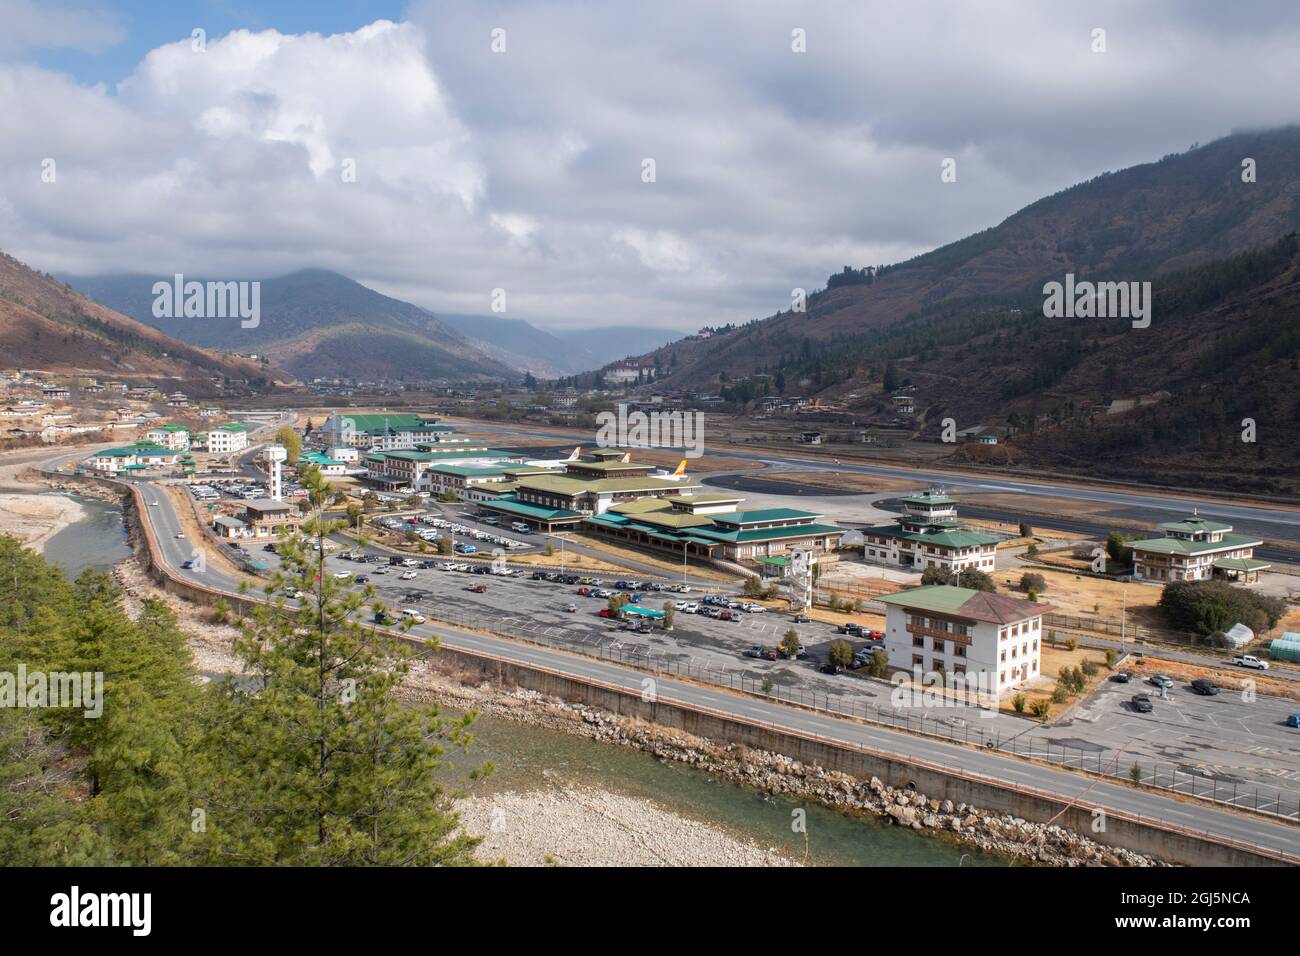 Bhutan, Paro. Paro Valley International Airport. Located in a deep valley at over 10,000 feet, it's rated as one of the most challenging airports in t Stock Photo